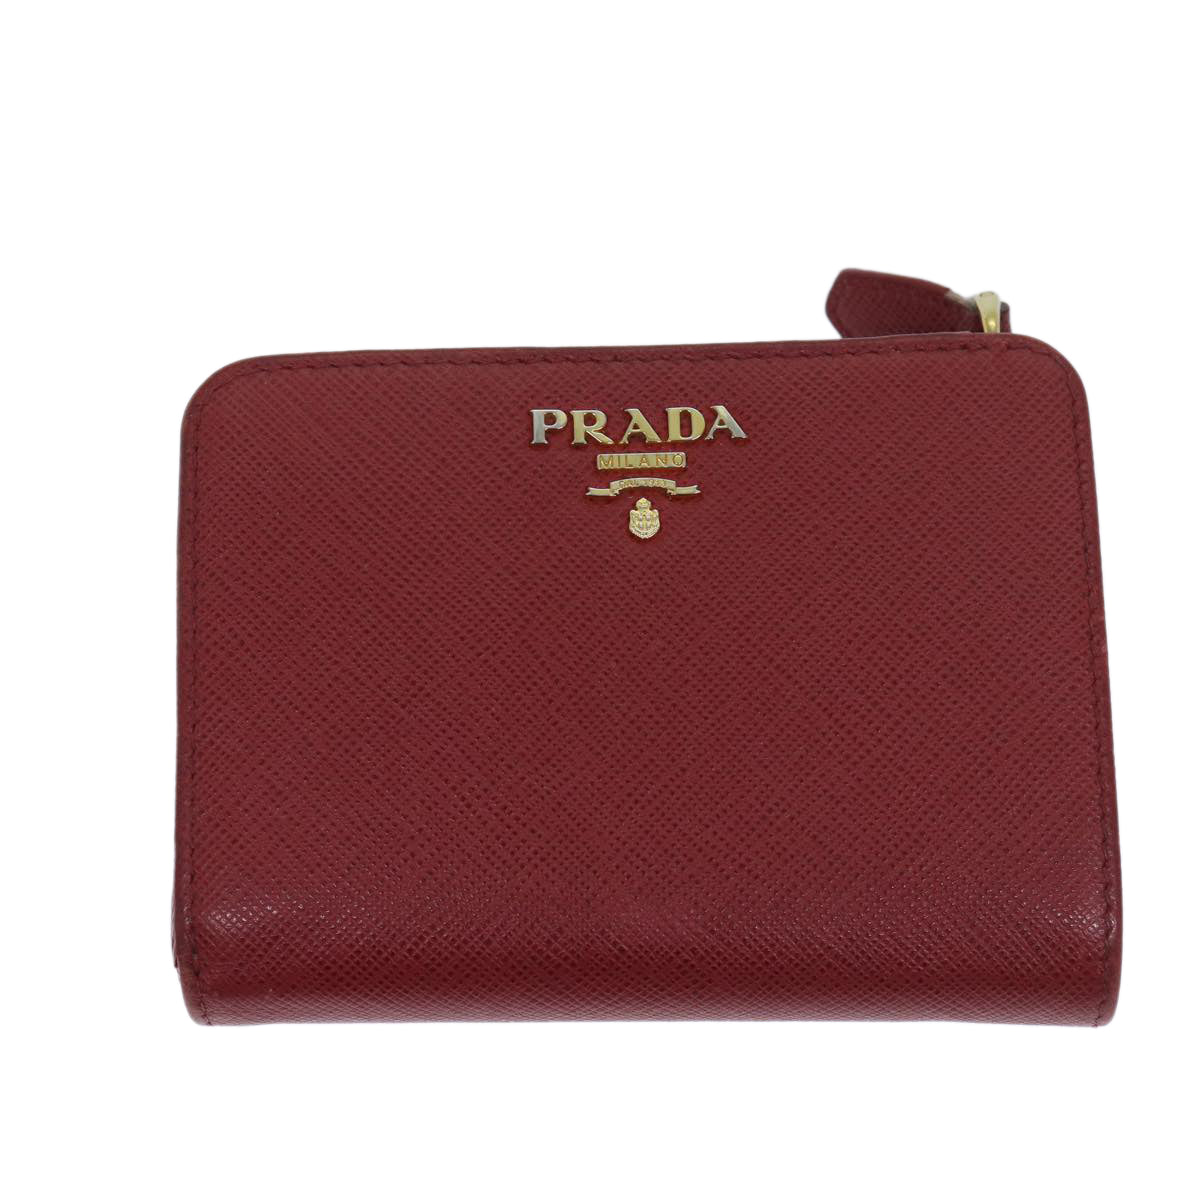 PRADA Bifold Wallet Safiano leather Red Auth ep3880